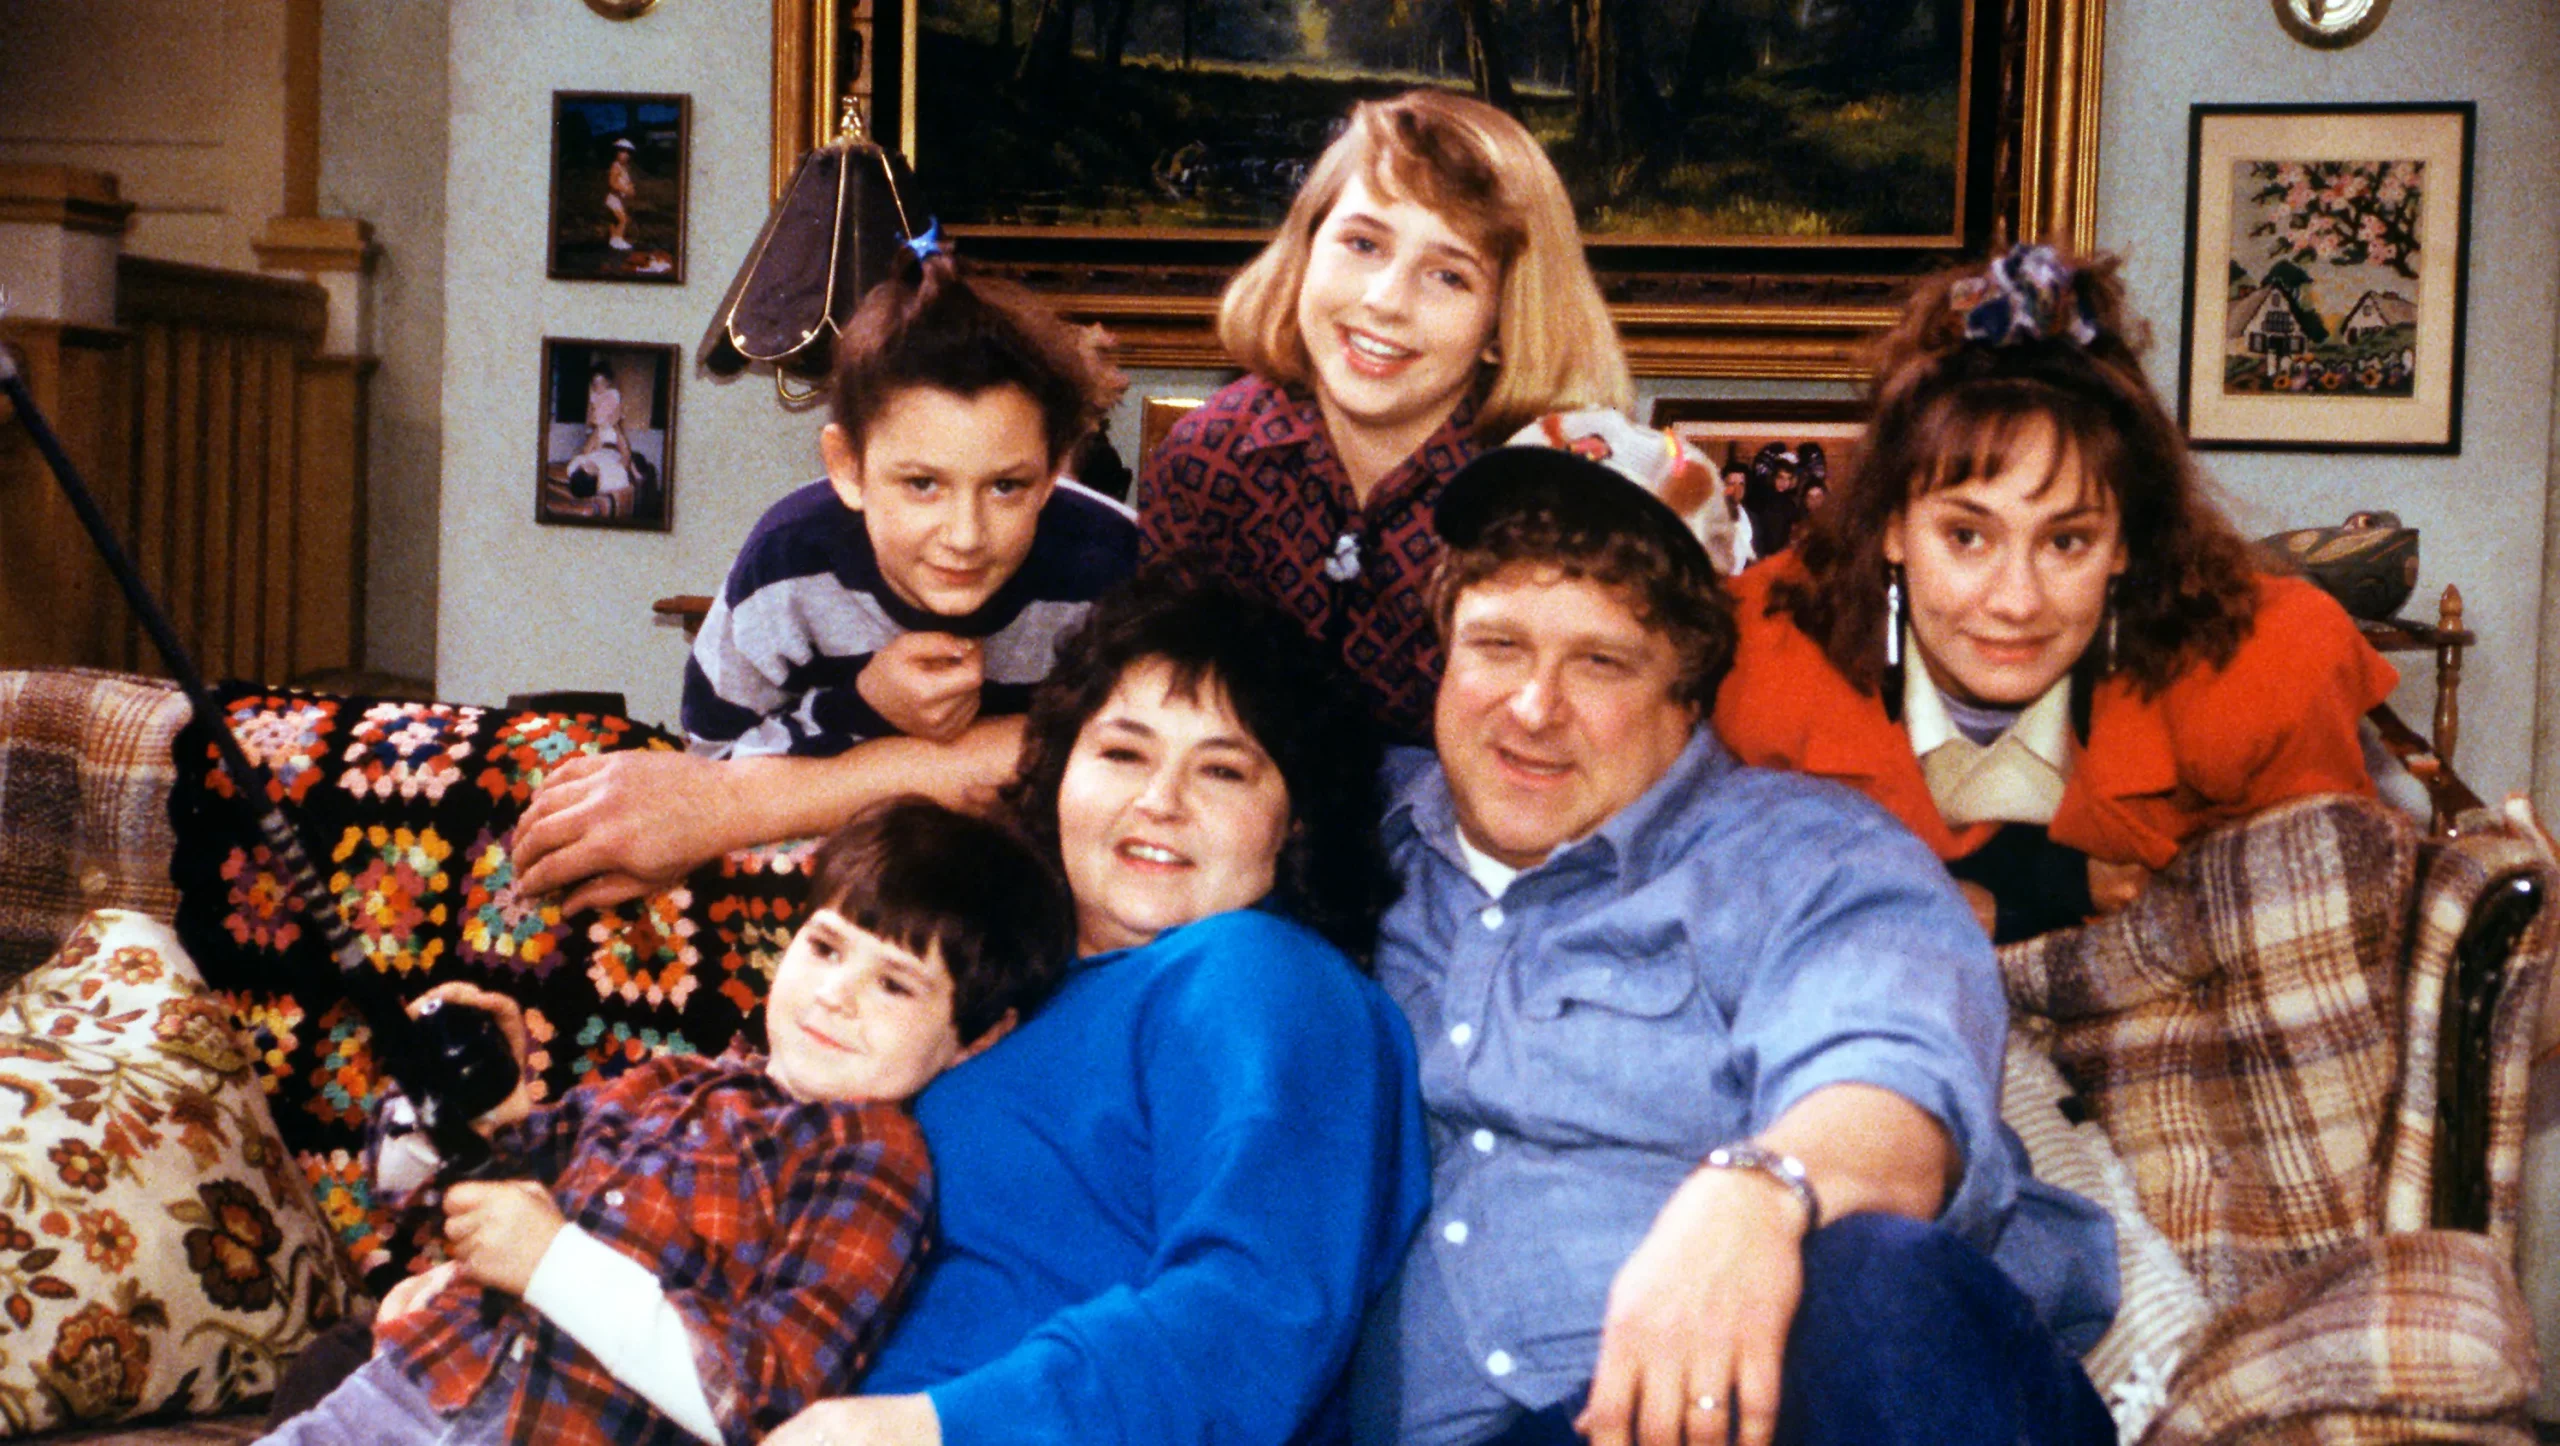 The Cast Of Roseanne